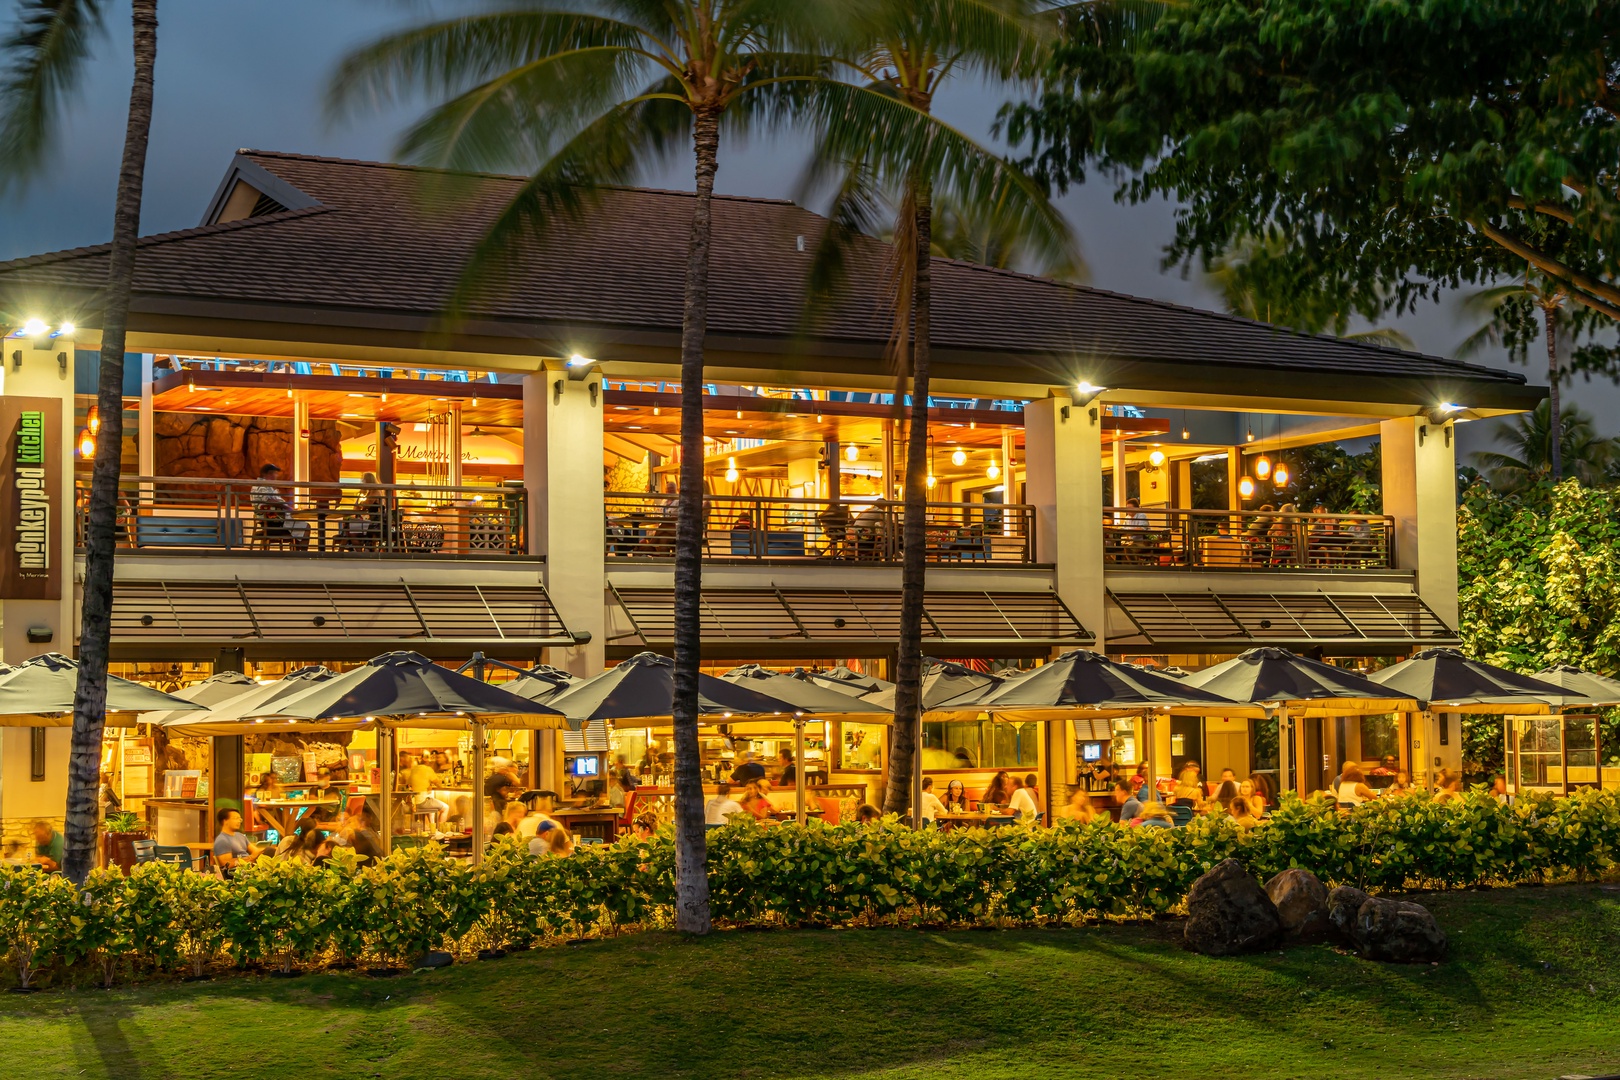 Kapolei Vacation Rentals, Kai Lani 20C - Stroll the island for shopping and dining experiences.